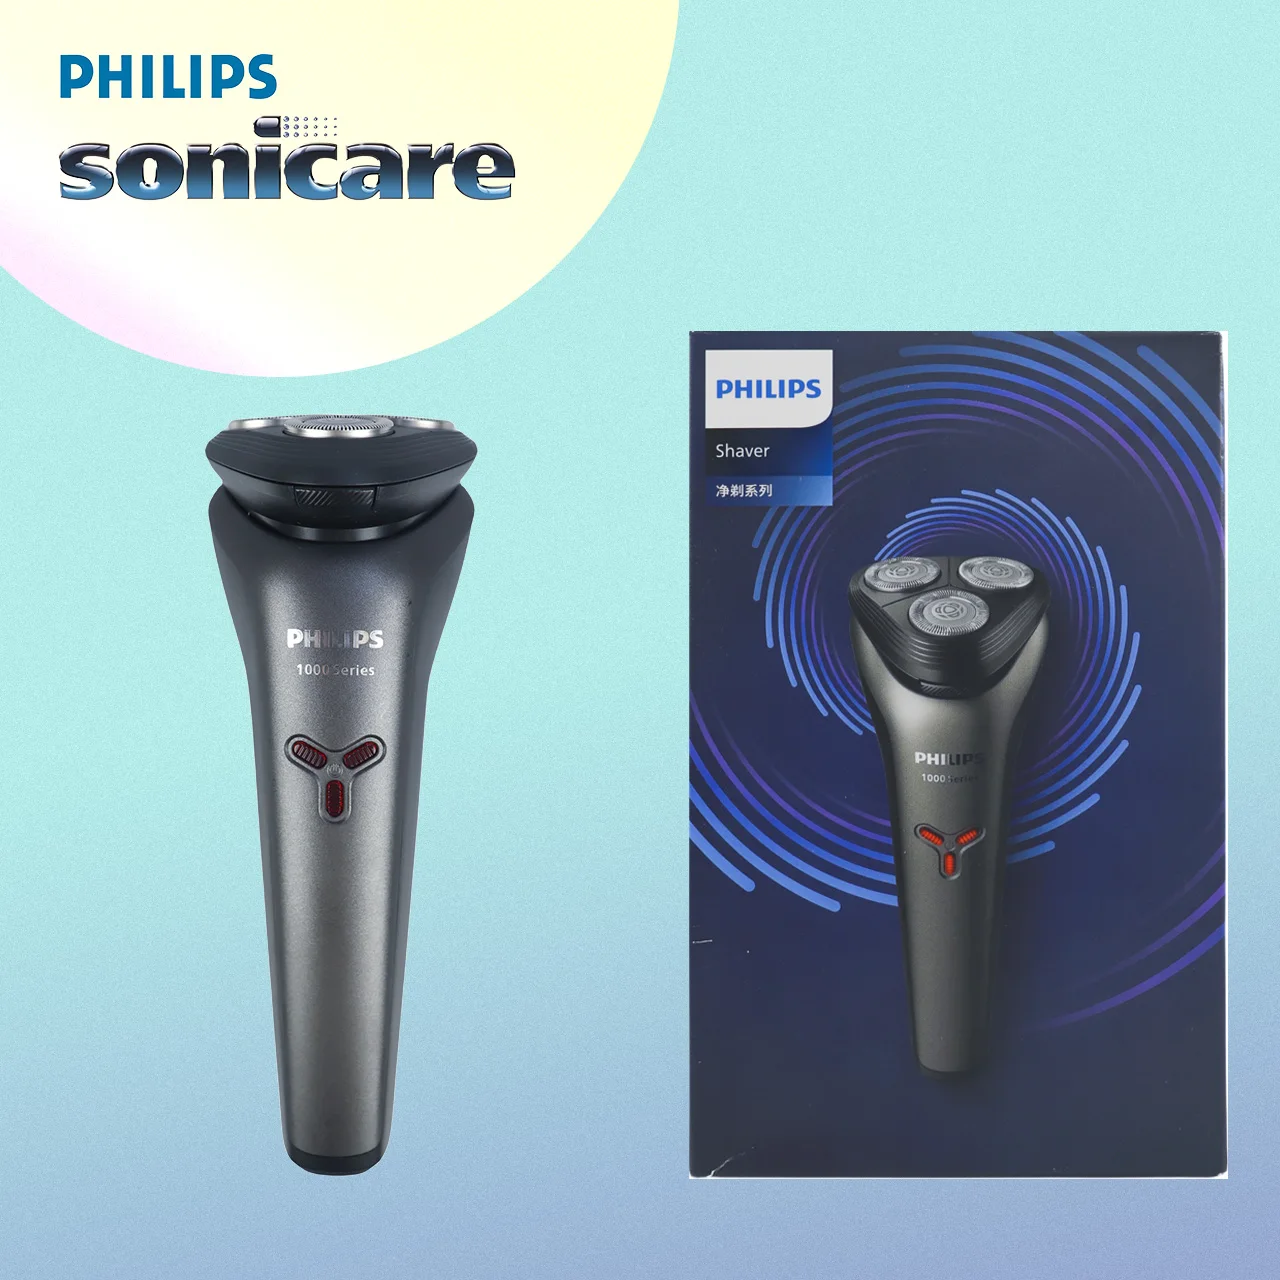 

Philips 1000 series S1213 men's shaver Rotation shaver Anthracite, Black, Stainless steel